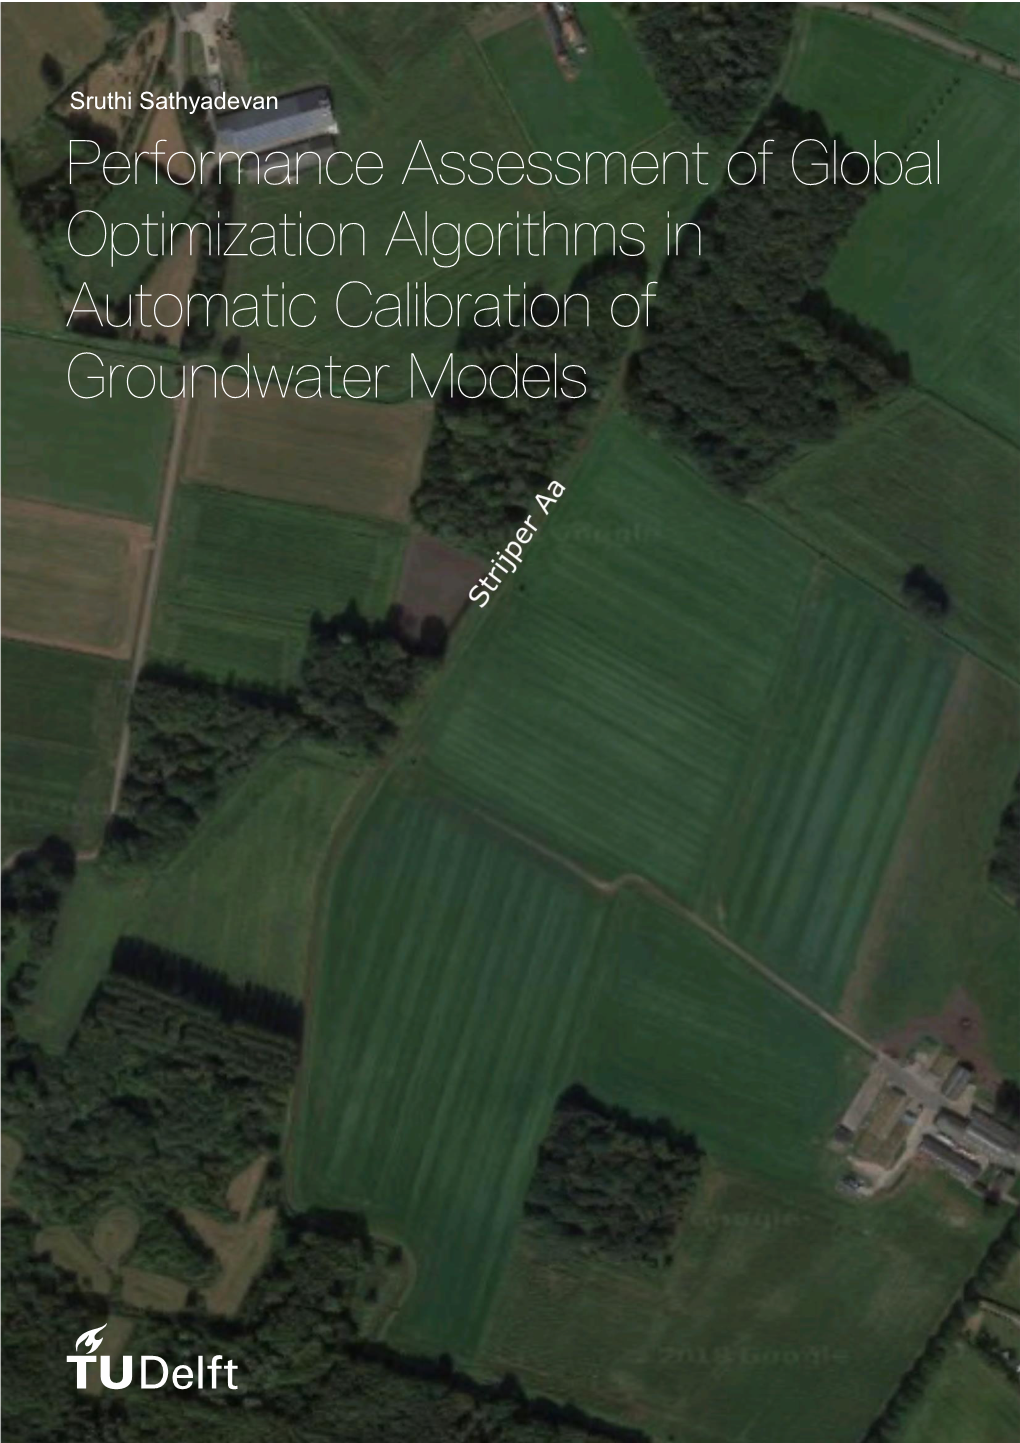 Performance Assessment of Global Optimization Algorithms in Automatic Calibration of Groundwater Models